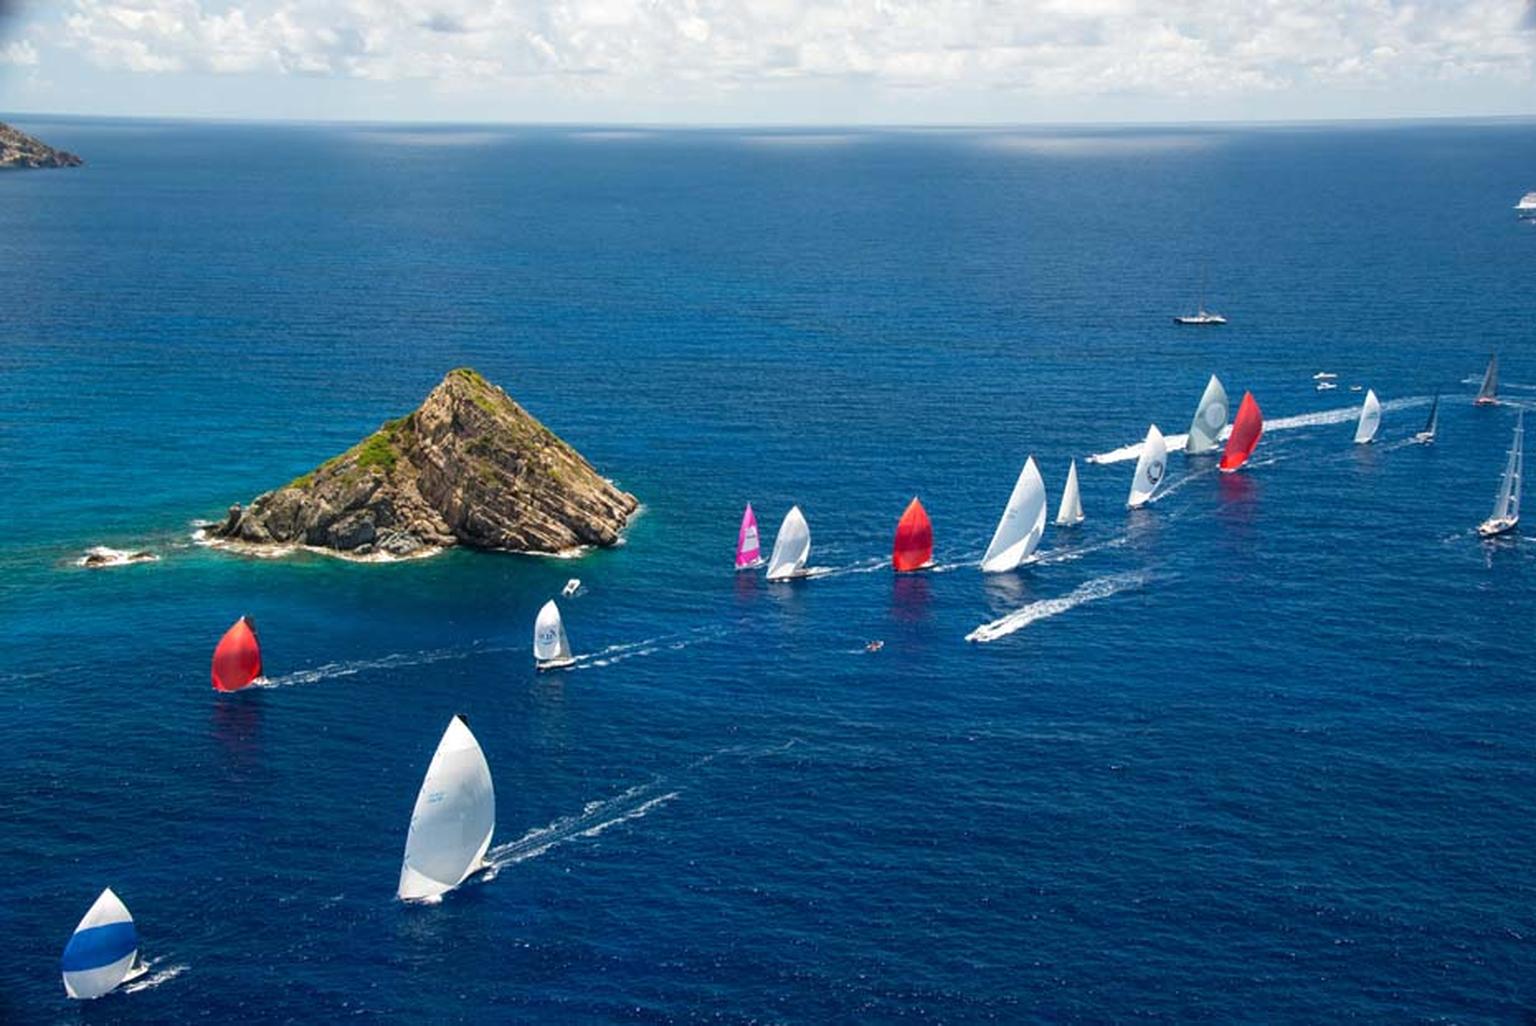 Maria Doulton joined the sailors aboard the 45ft sailing boat Jolt 2, captained by Peter Harrison, CEO of Richard Mille Europe, as it participated in the Les Voiles de Saint Barth 2014 regatta